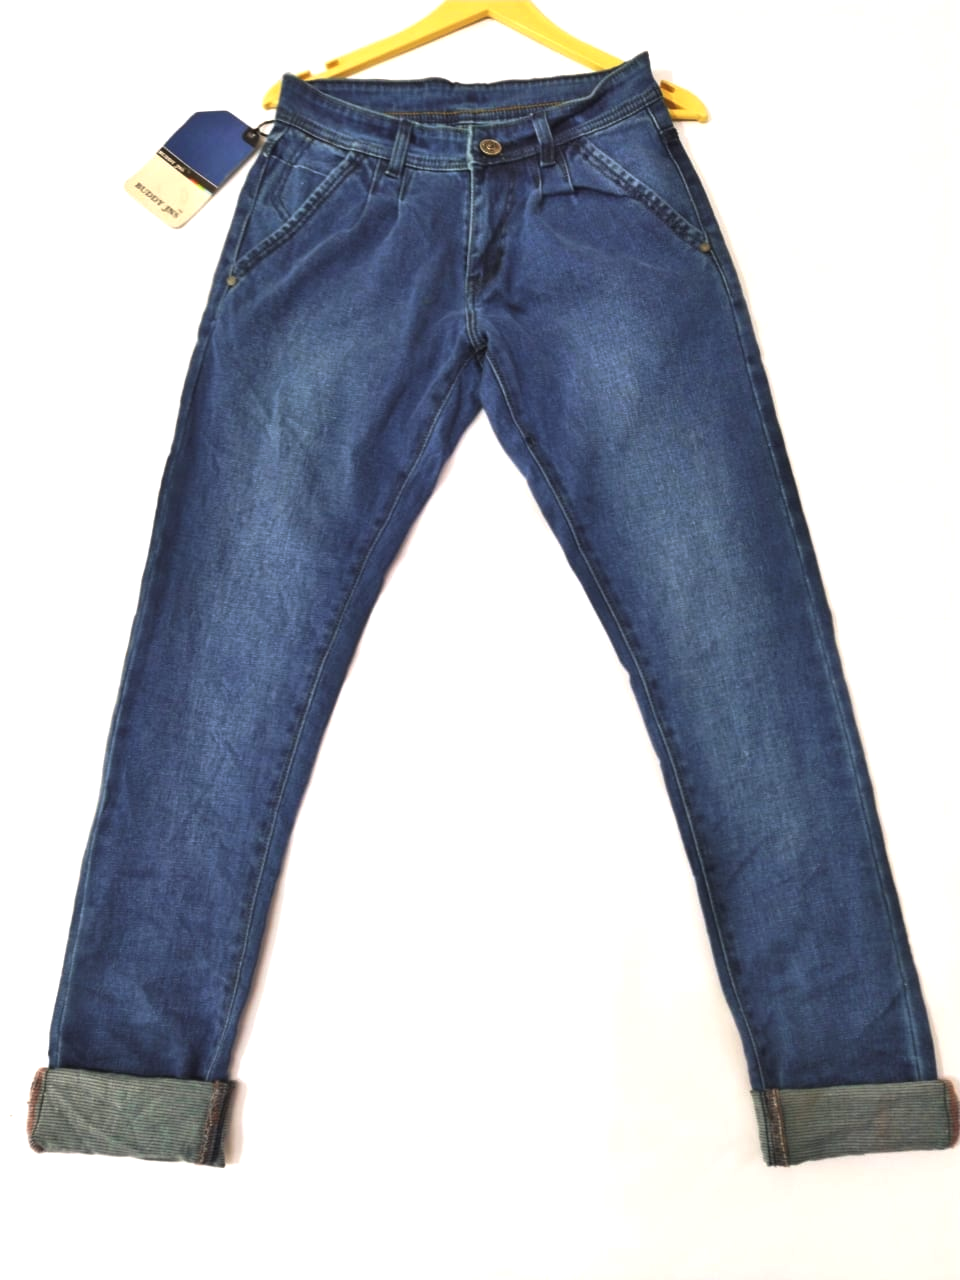 Men’s Slim-Fit Stretchable and Simply Knitted Jeans